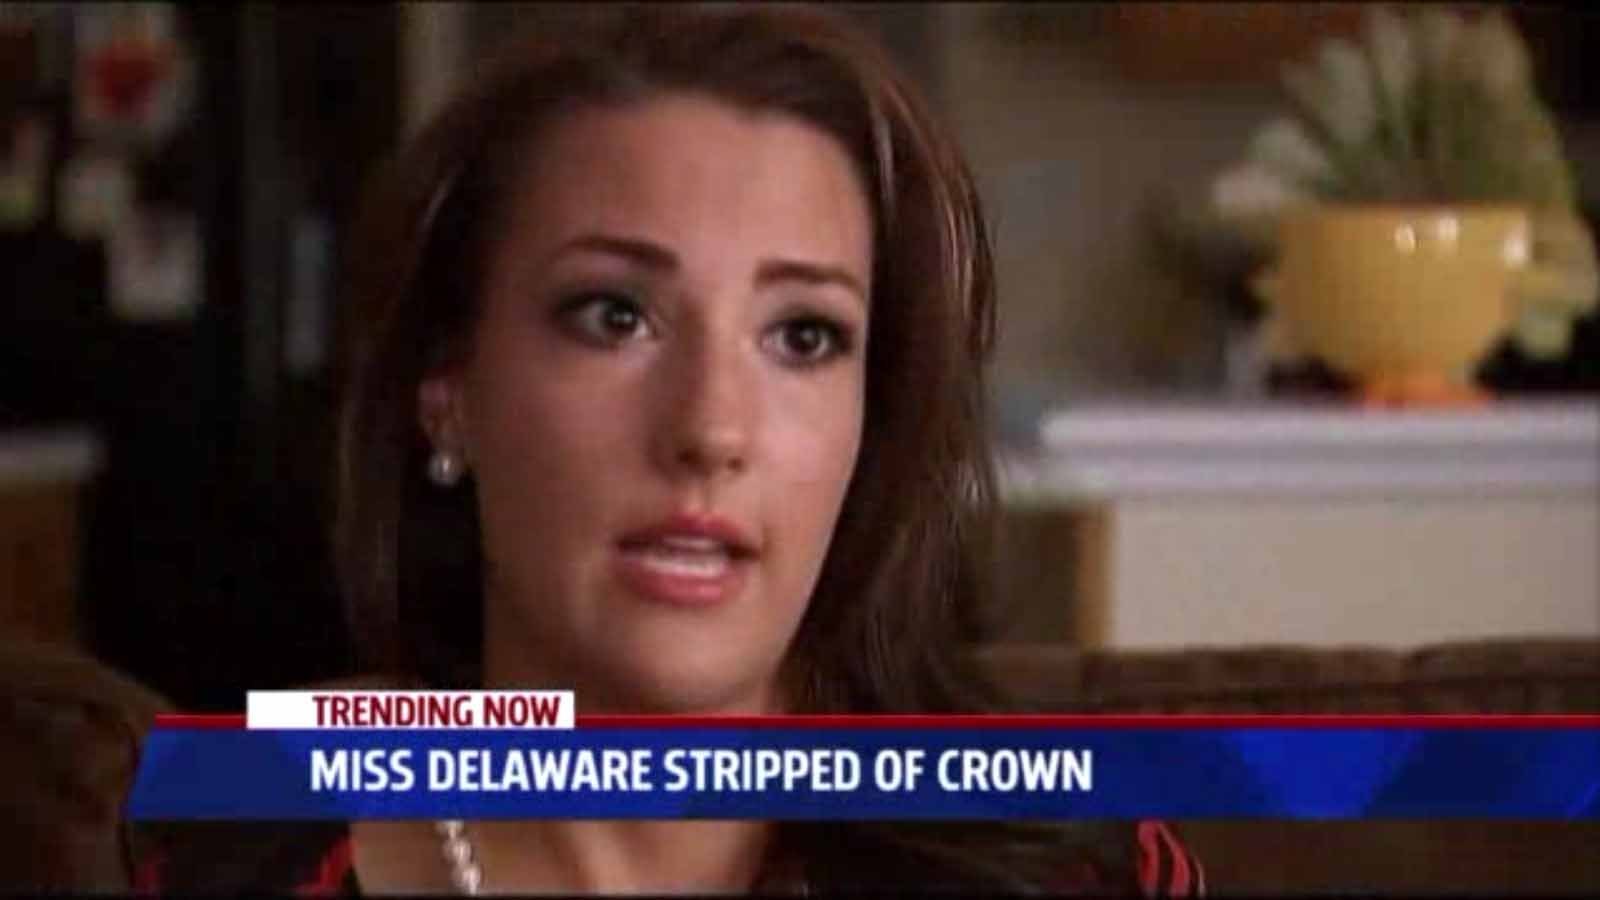 Miss Delaware 24 Stripped Of Crown Because She Is Too Old La Times 